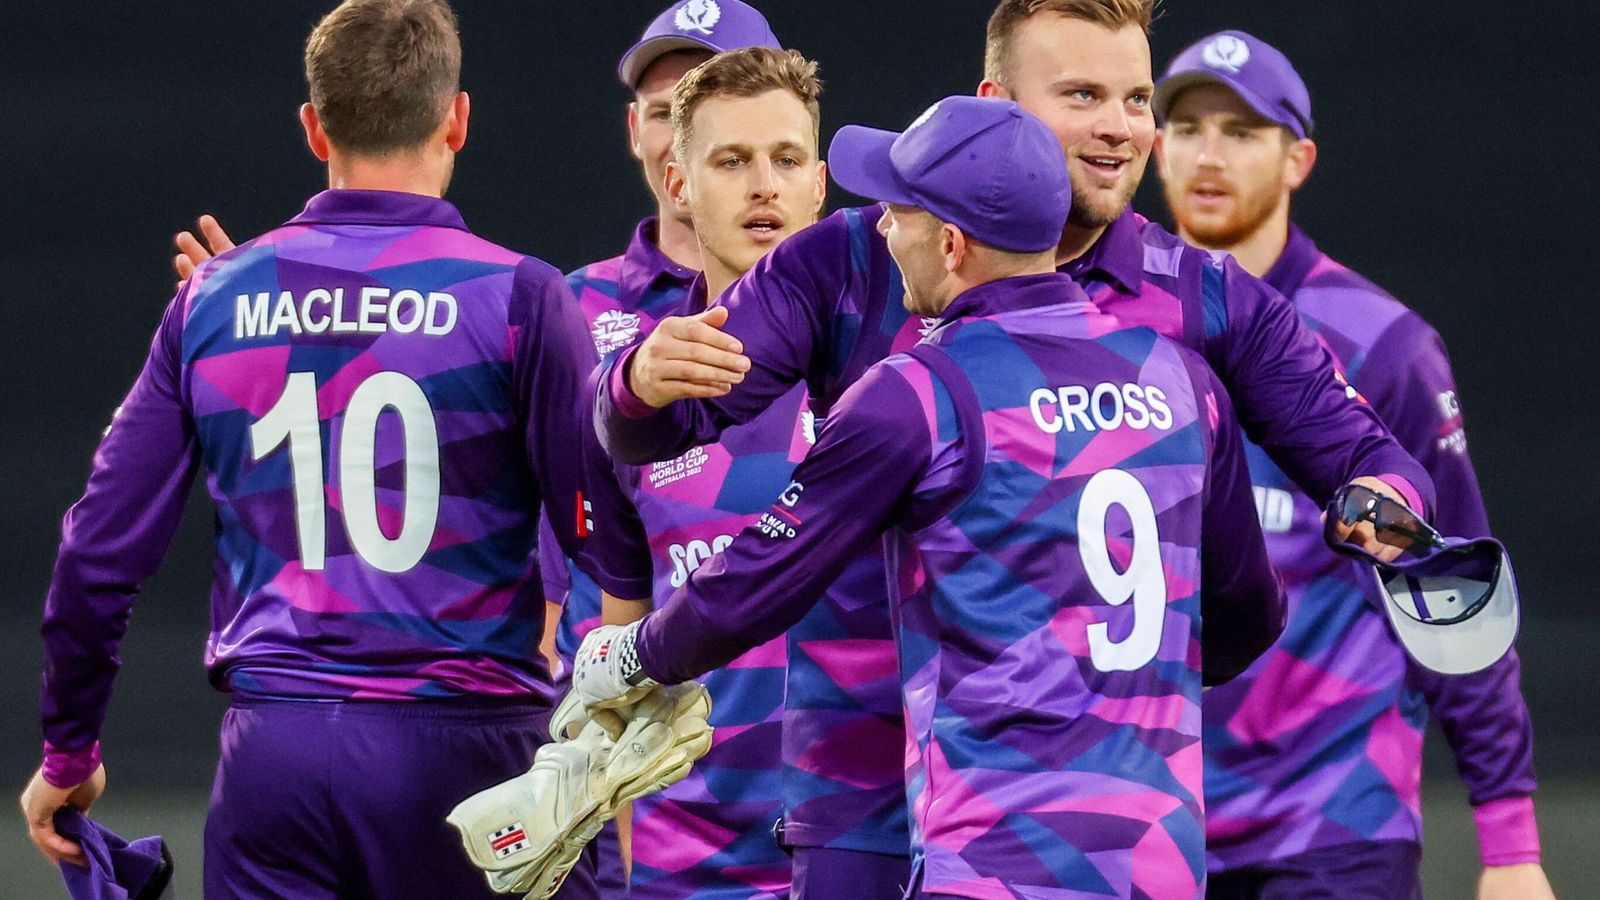 T20 World Cup: Scotland have ‘unfinished business’ and would ‘love’ showdown with England